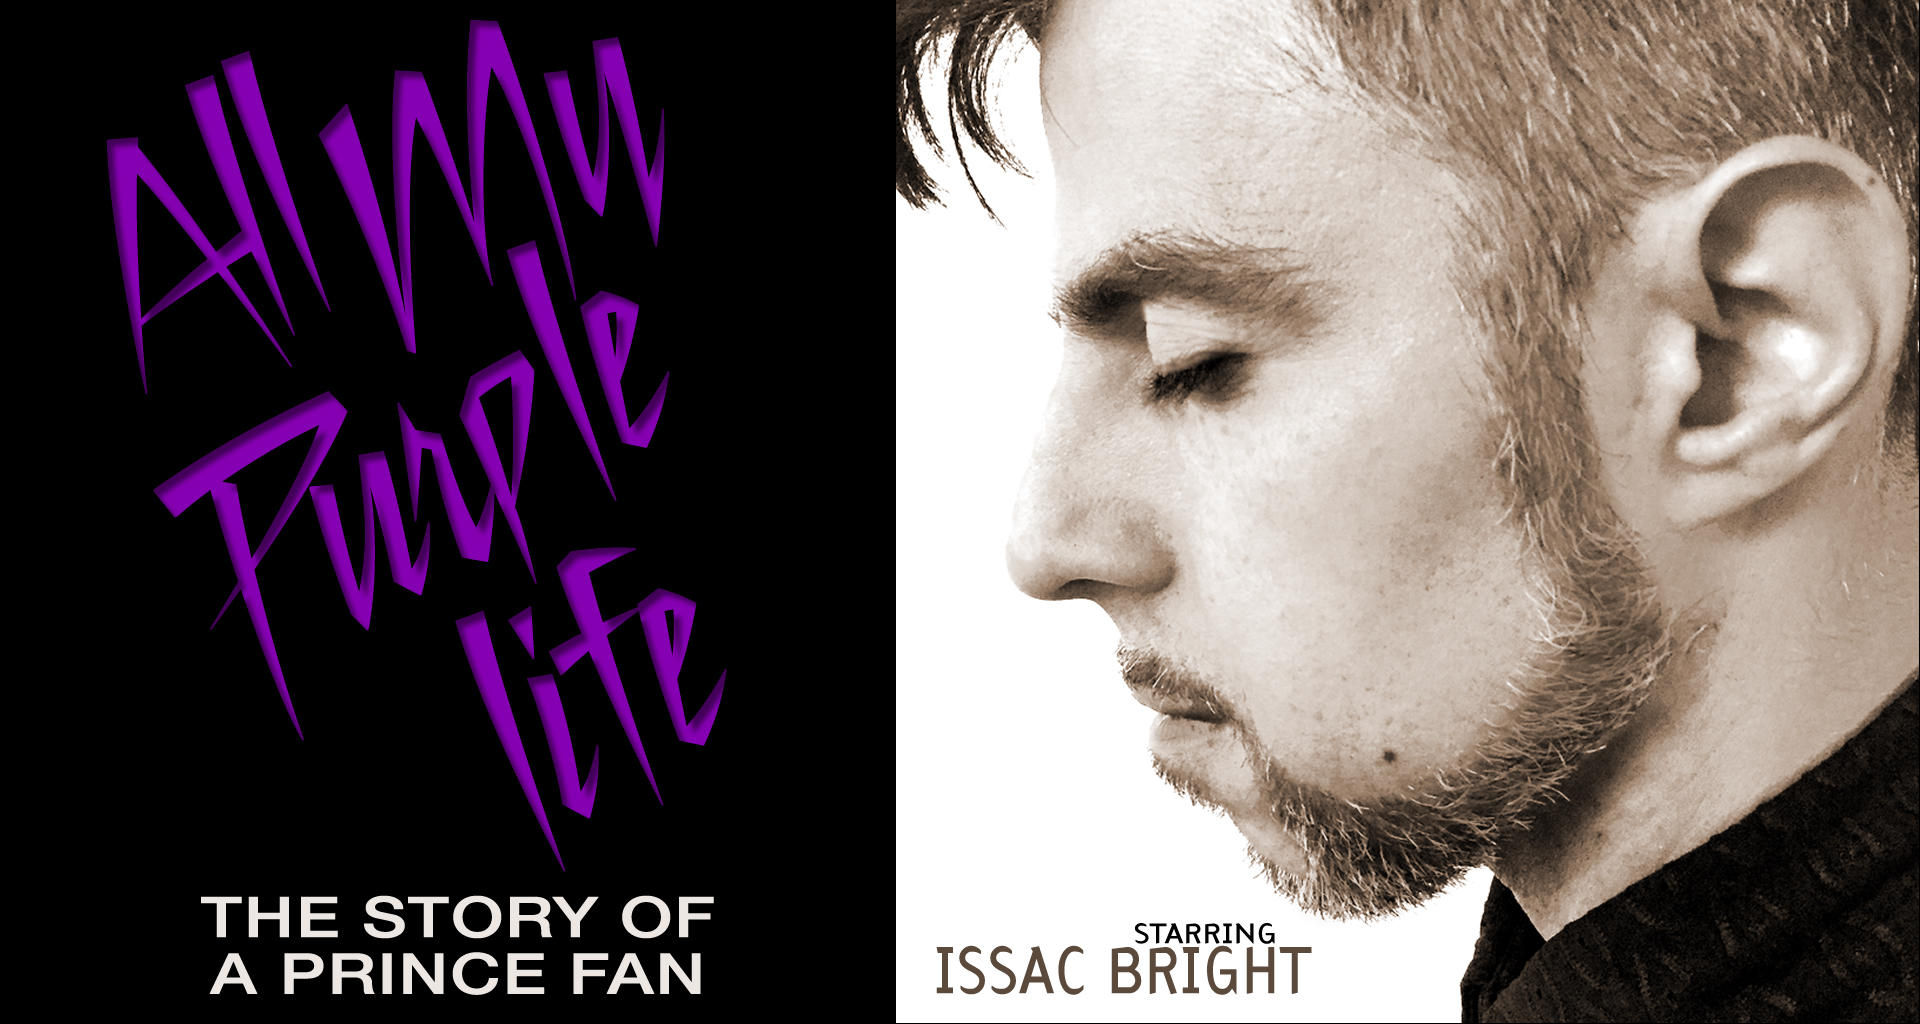 All My Purple Life - The Story of a Prince Fan, starring Issac Bright